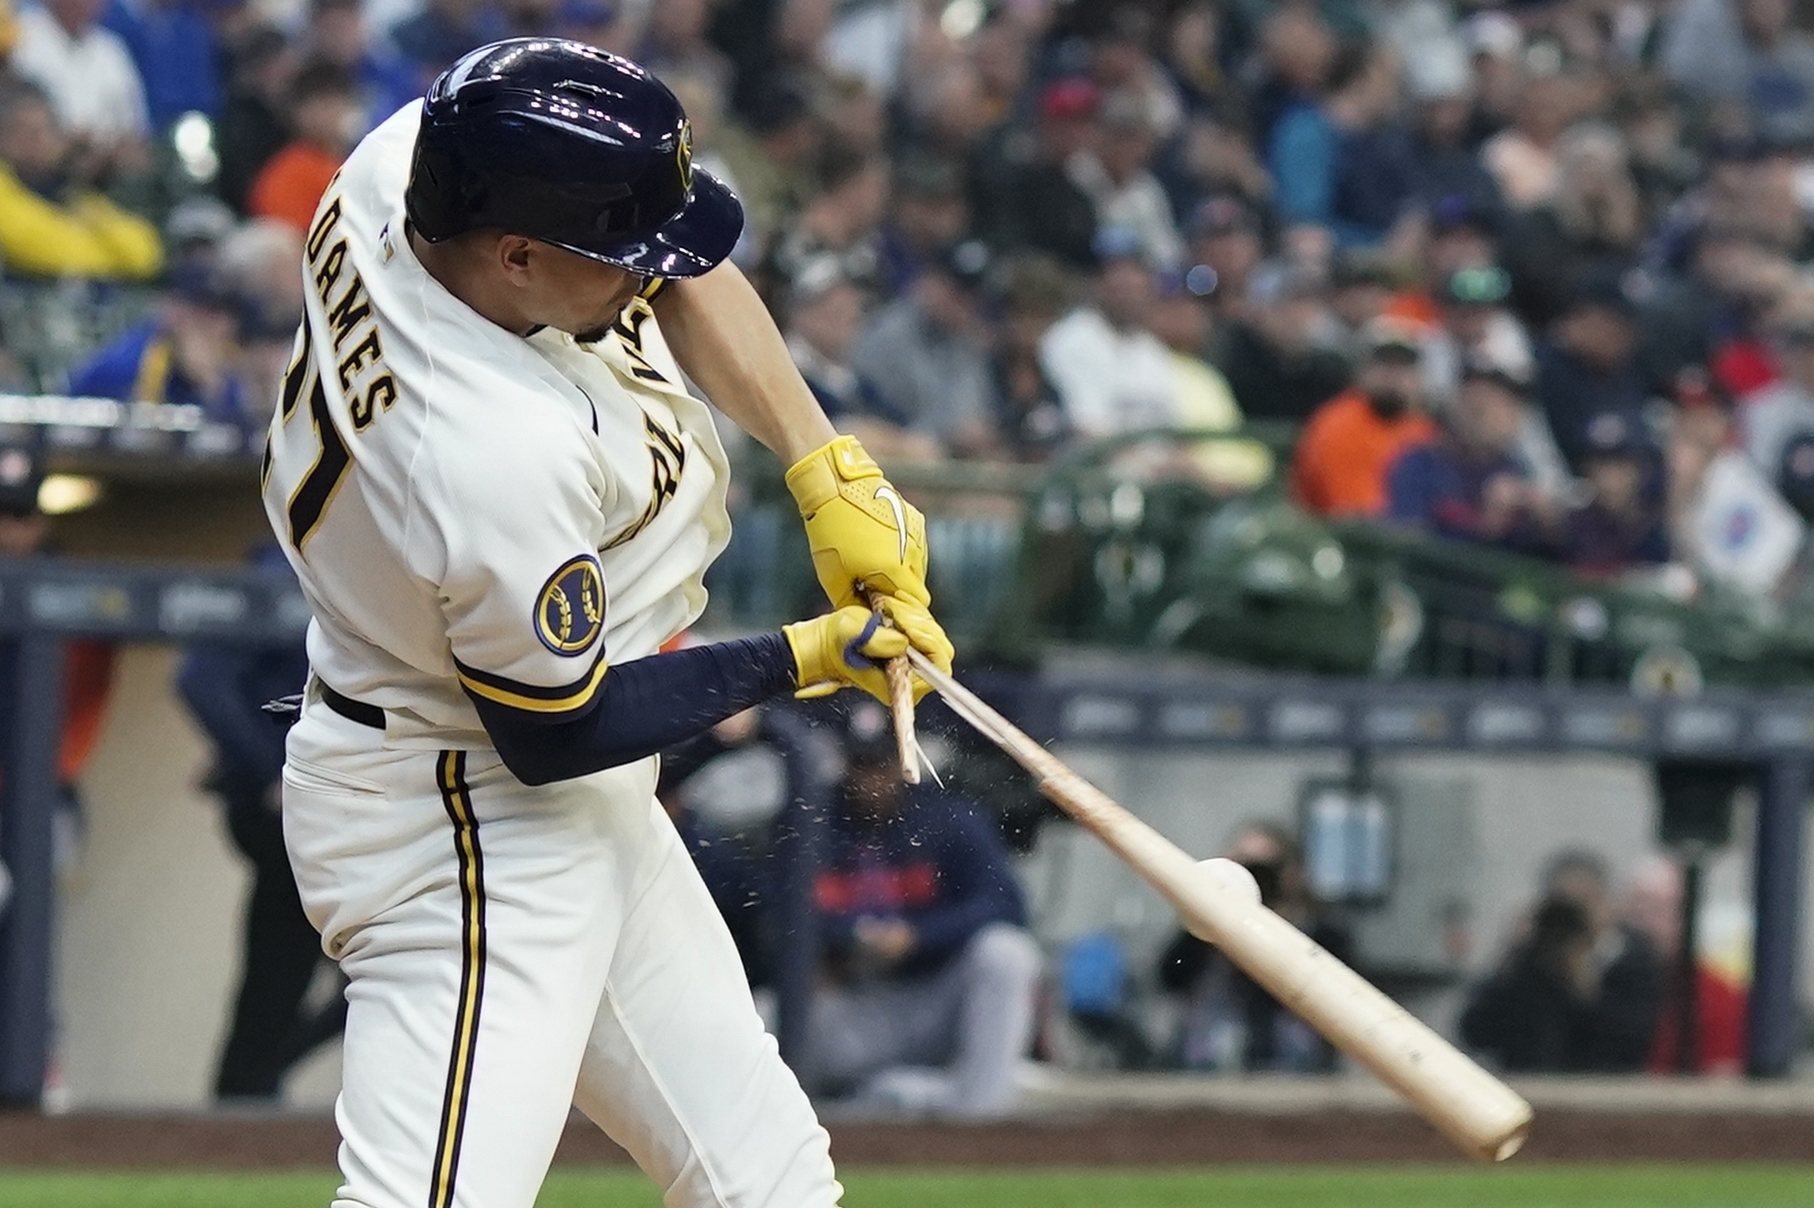 Willy Adames struck by foul ball, Brewers pummeled by Giants 15-1